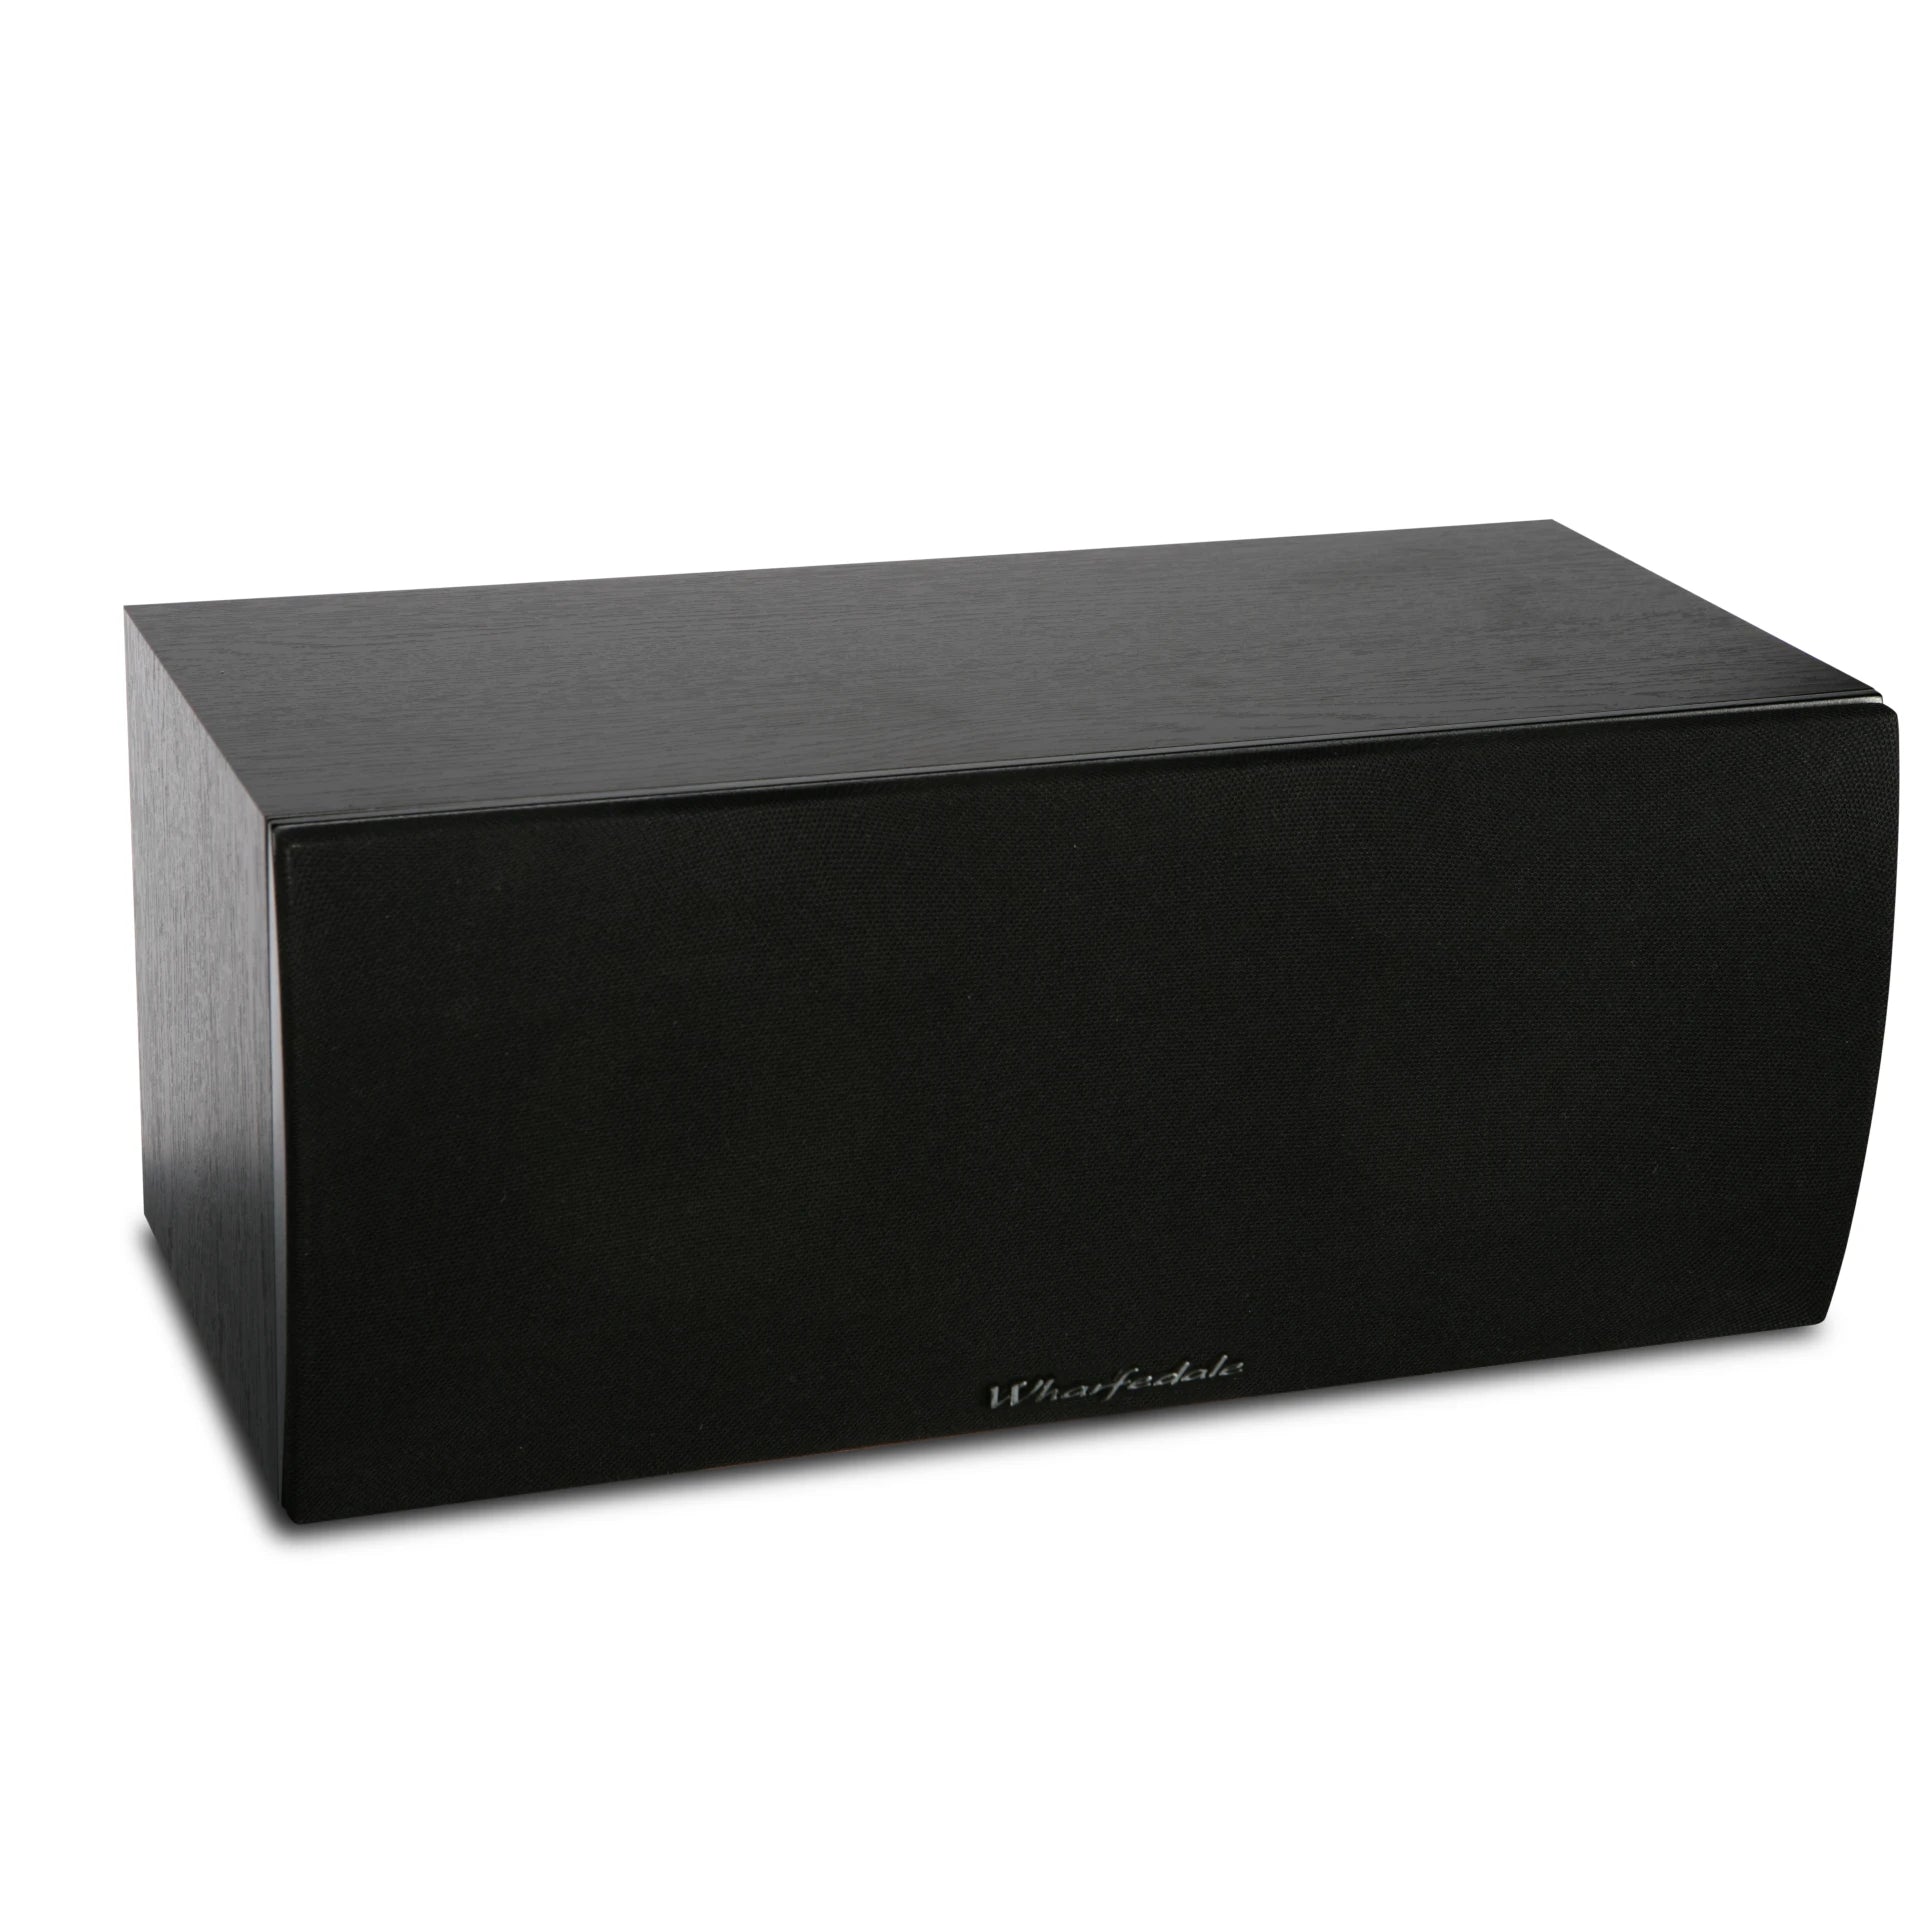 Wharfedale Crystal4 5.0 - Home Theatre System Package (Black)